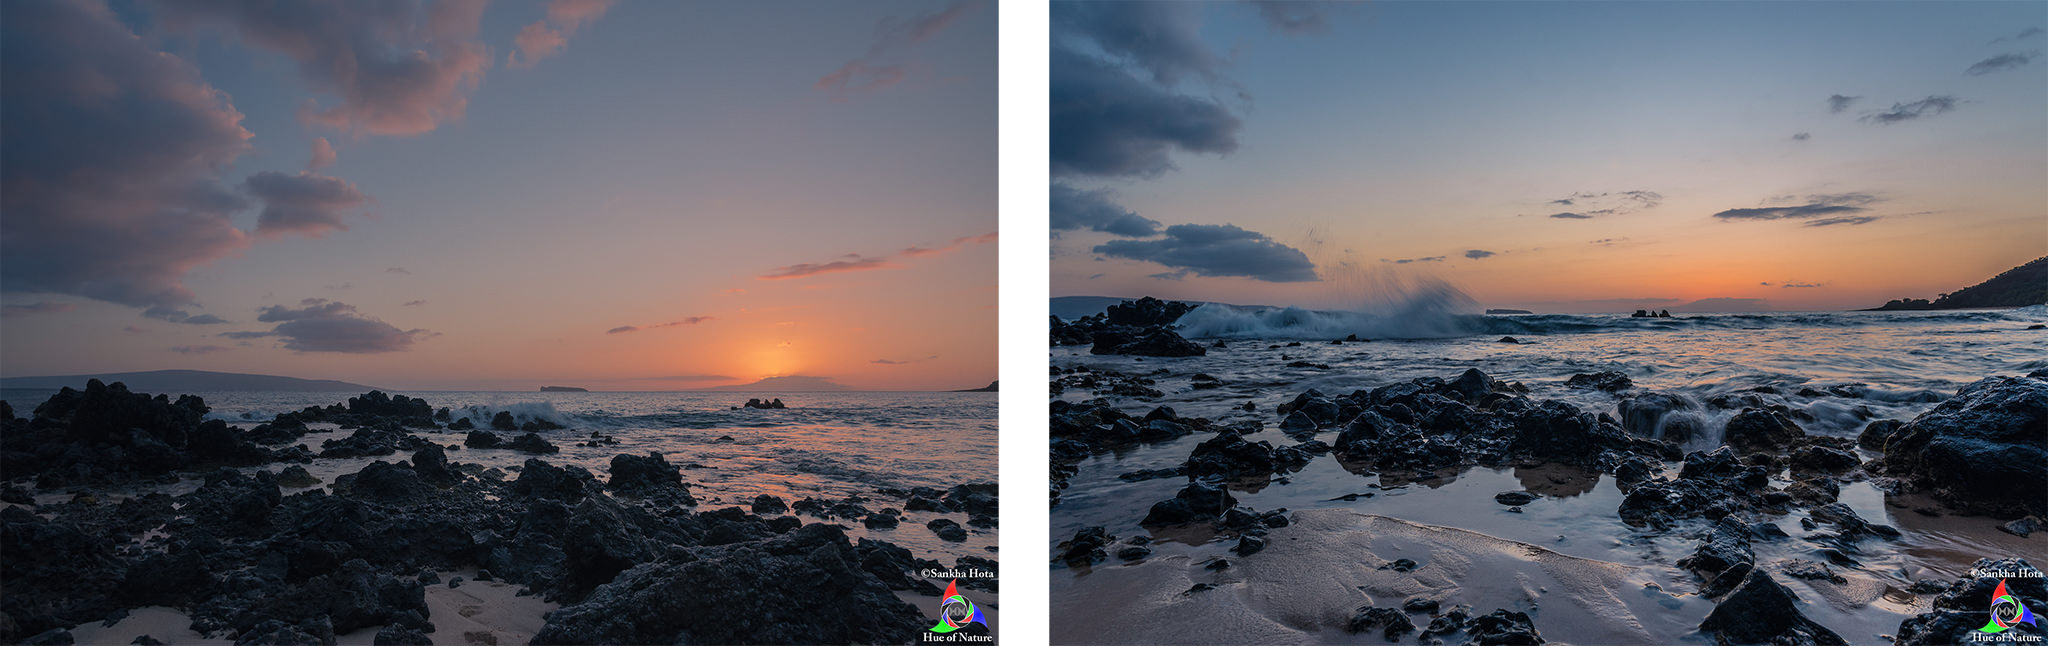 Sunset (left), After sunset (right) at Makena Beach